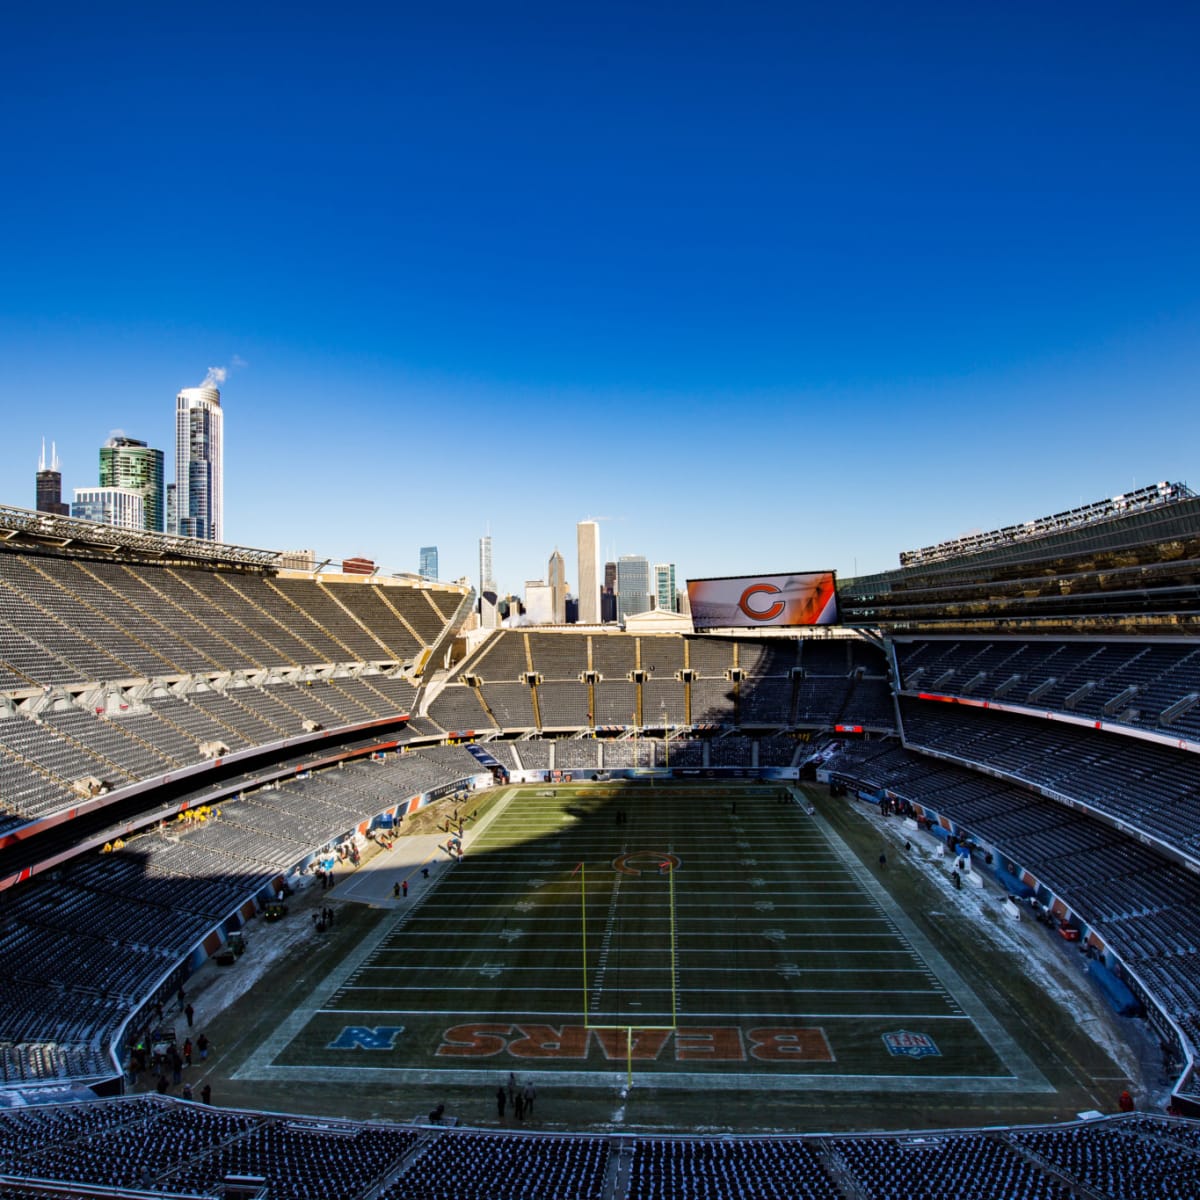 Chicago Bears stadium in Chicago could still be a possibility for